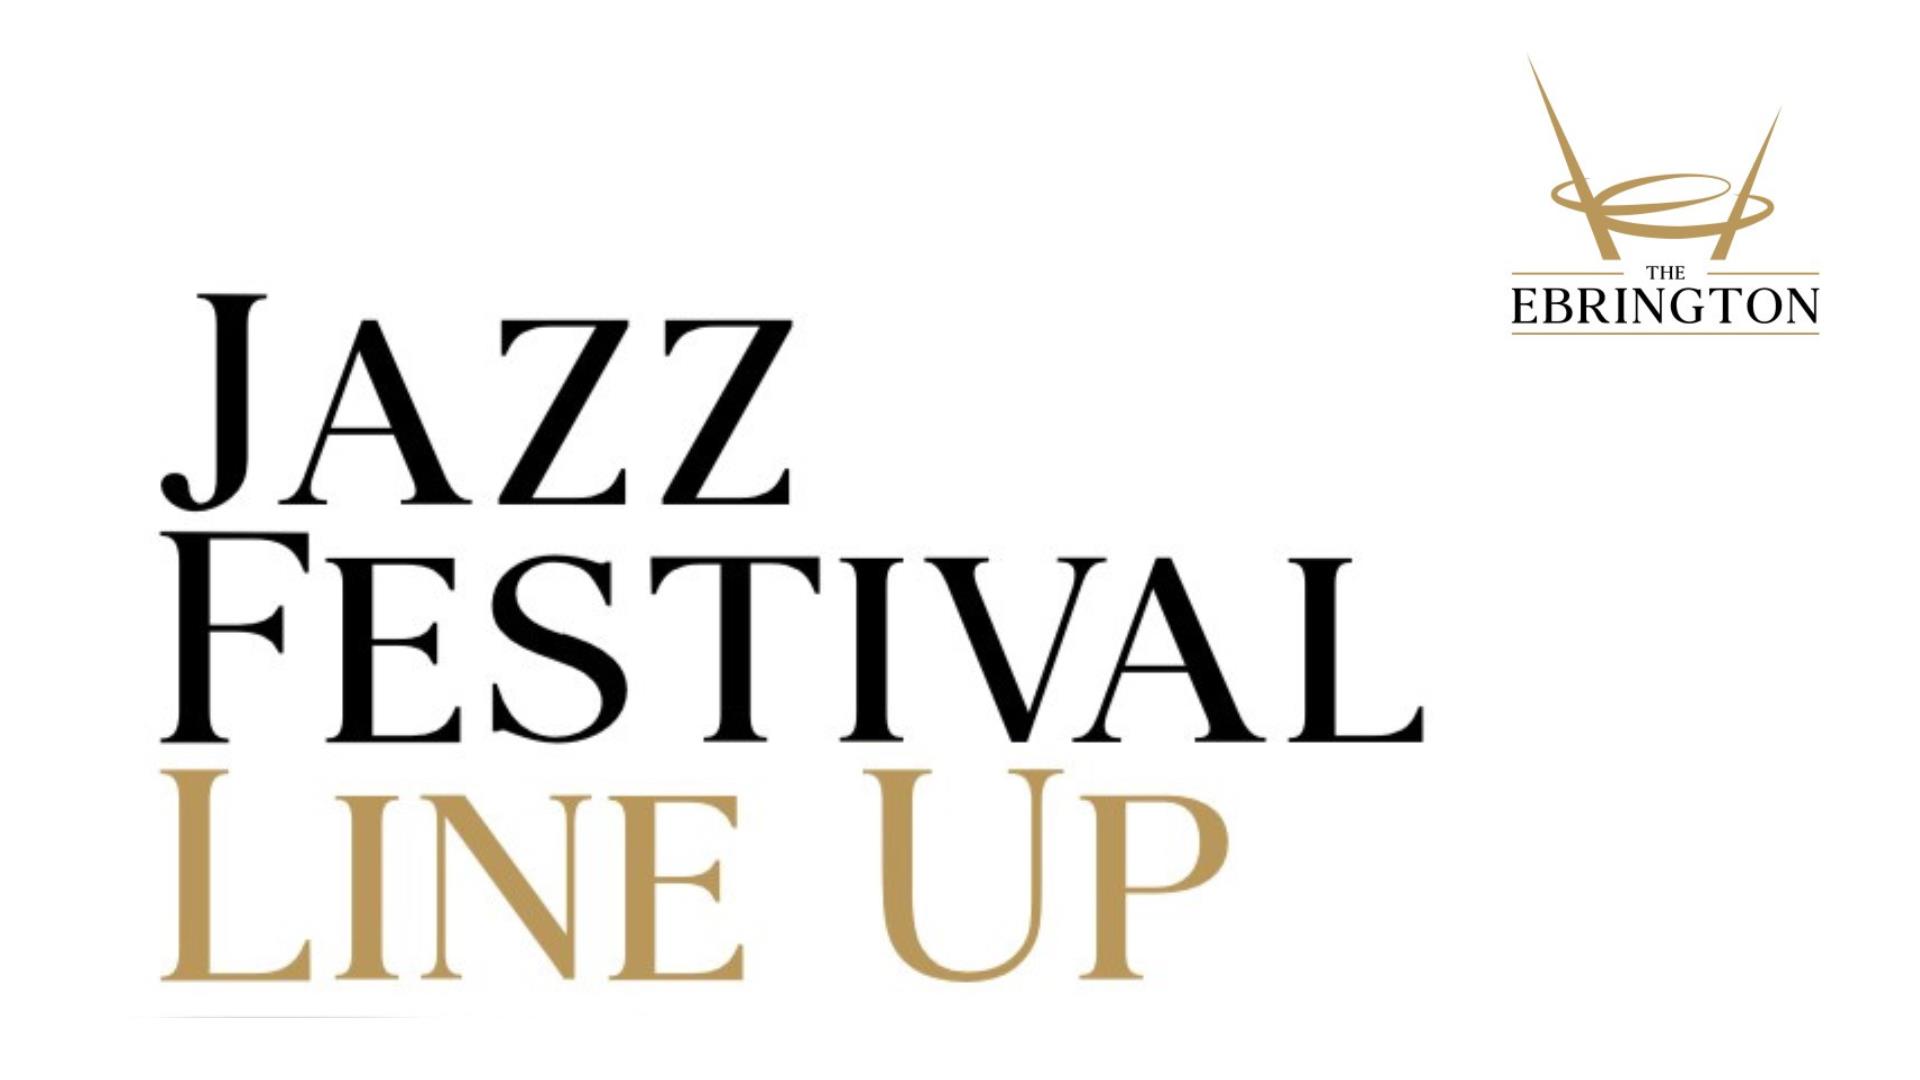 Promotional image for the Jazz Festival Line Up and The Ebrington Hotel